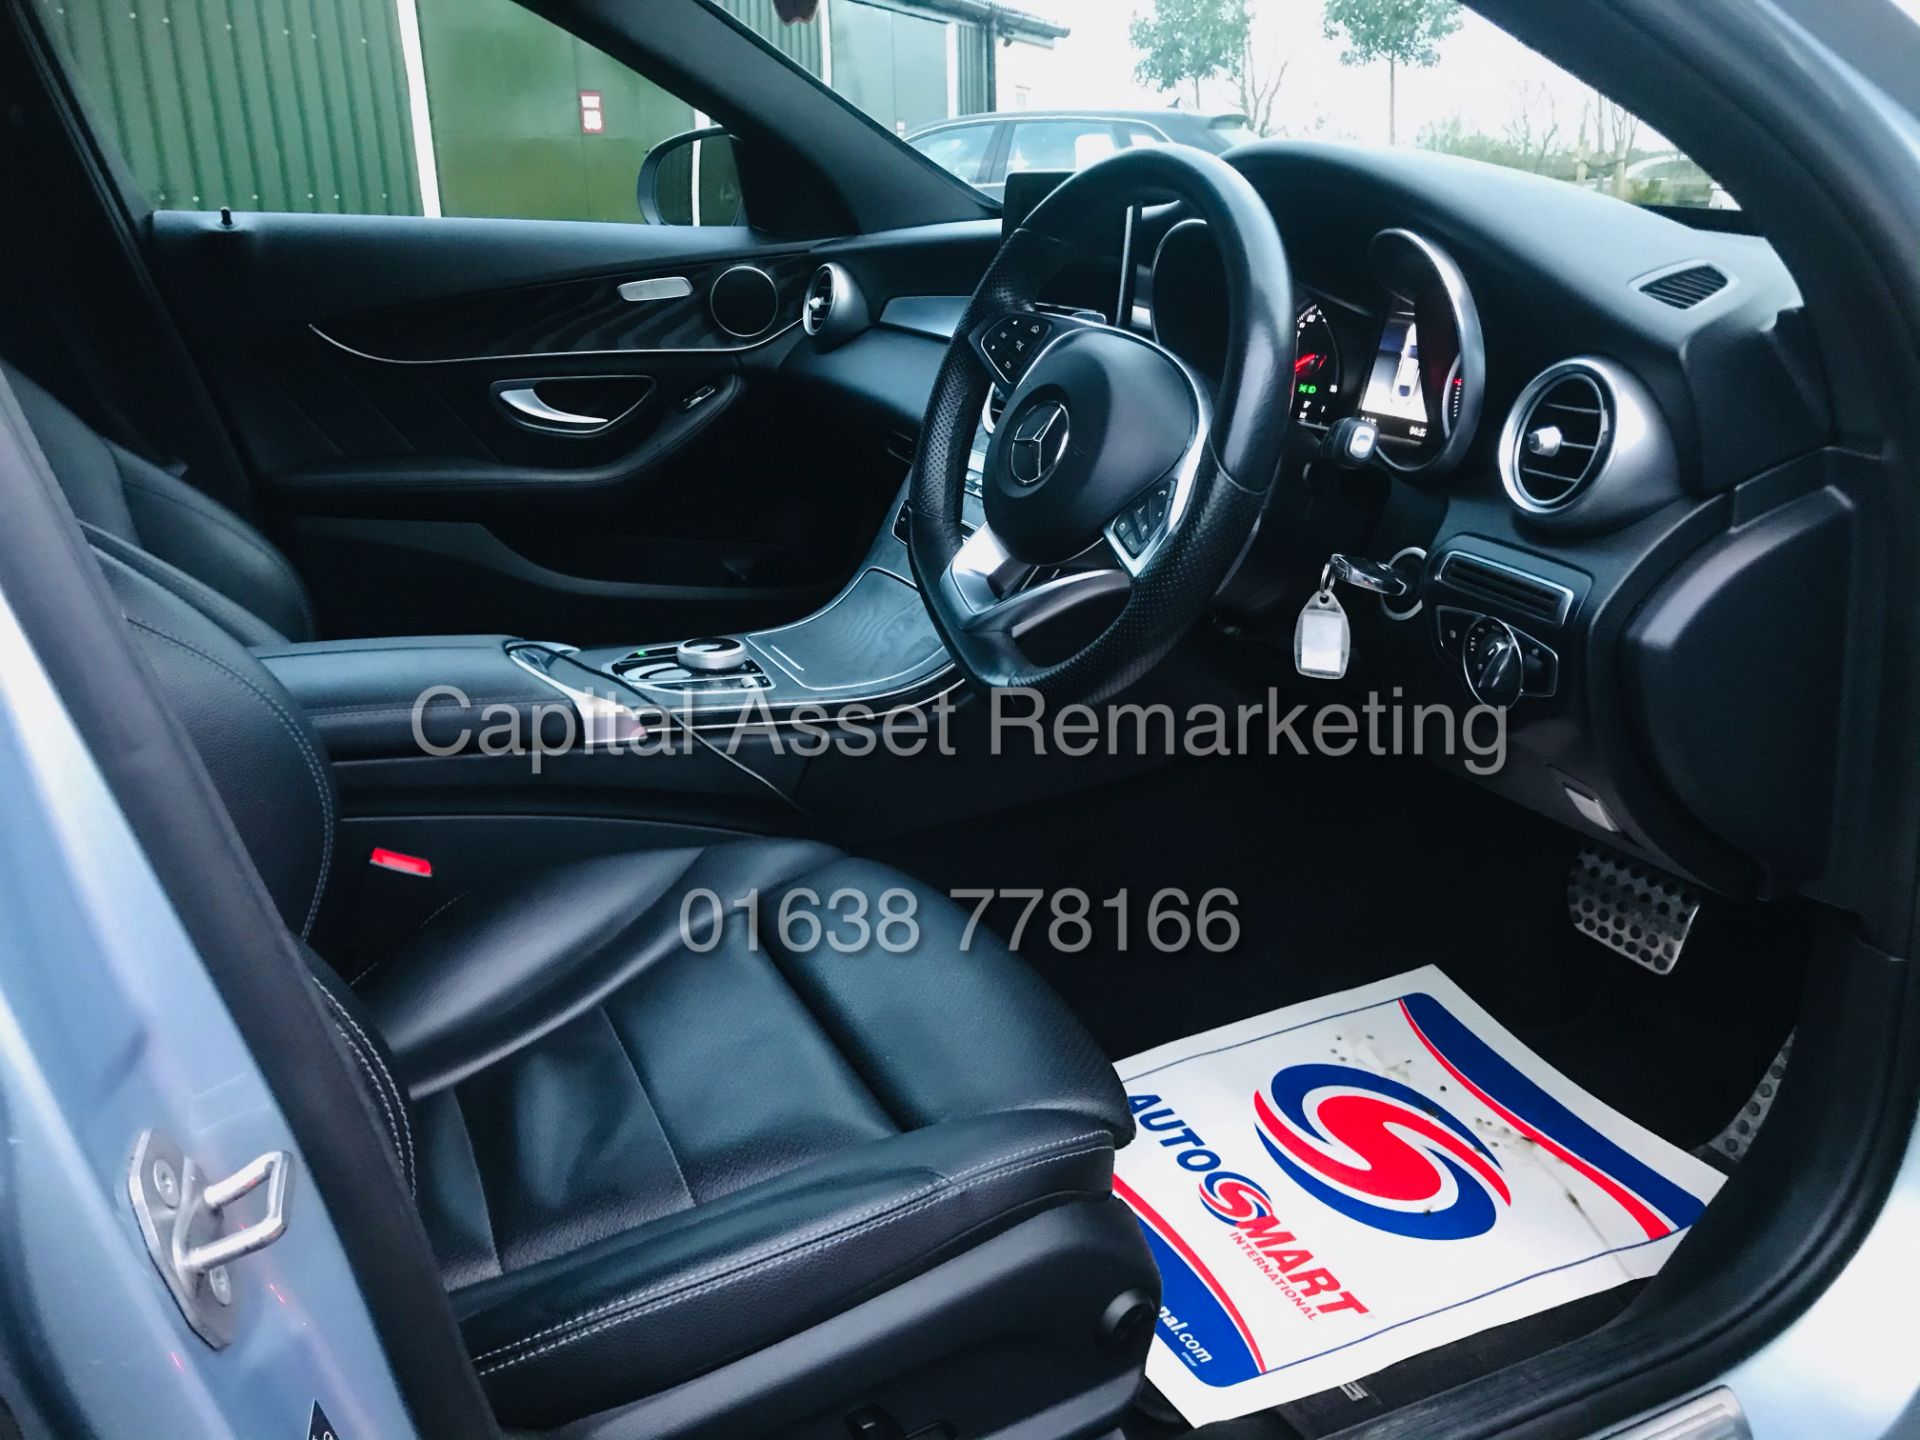 (ON SALE) MERCEDES C220d "AMG LINE" AUTOMATIC (18 REG) 1 OWNER - LEATHER - NAV - REAR CAMERA - Image 13 of 22